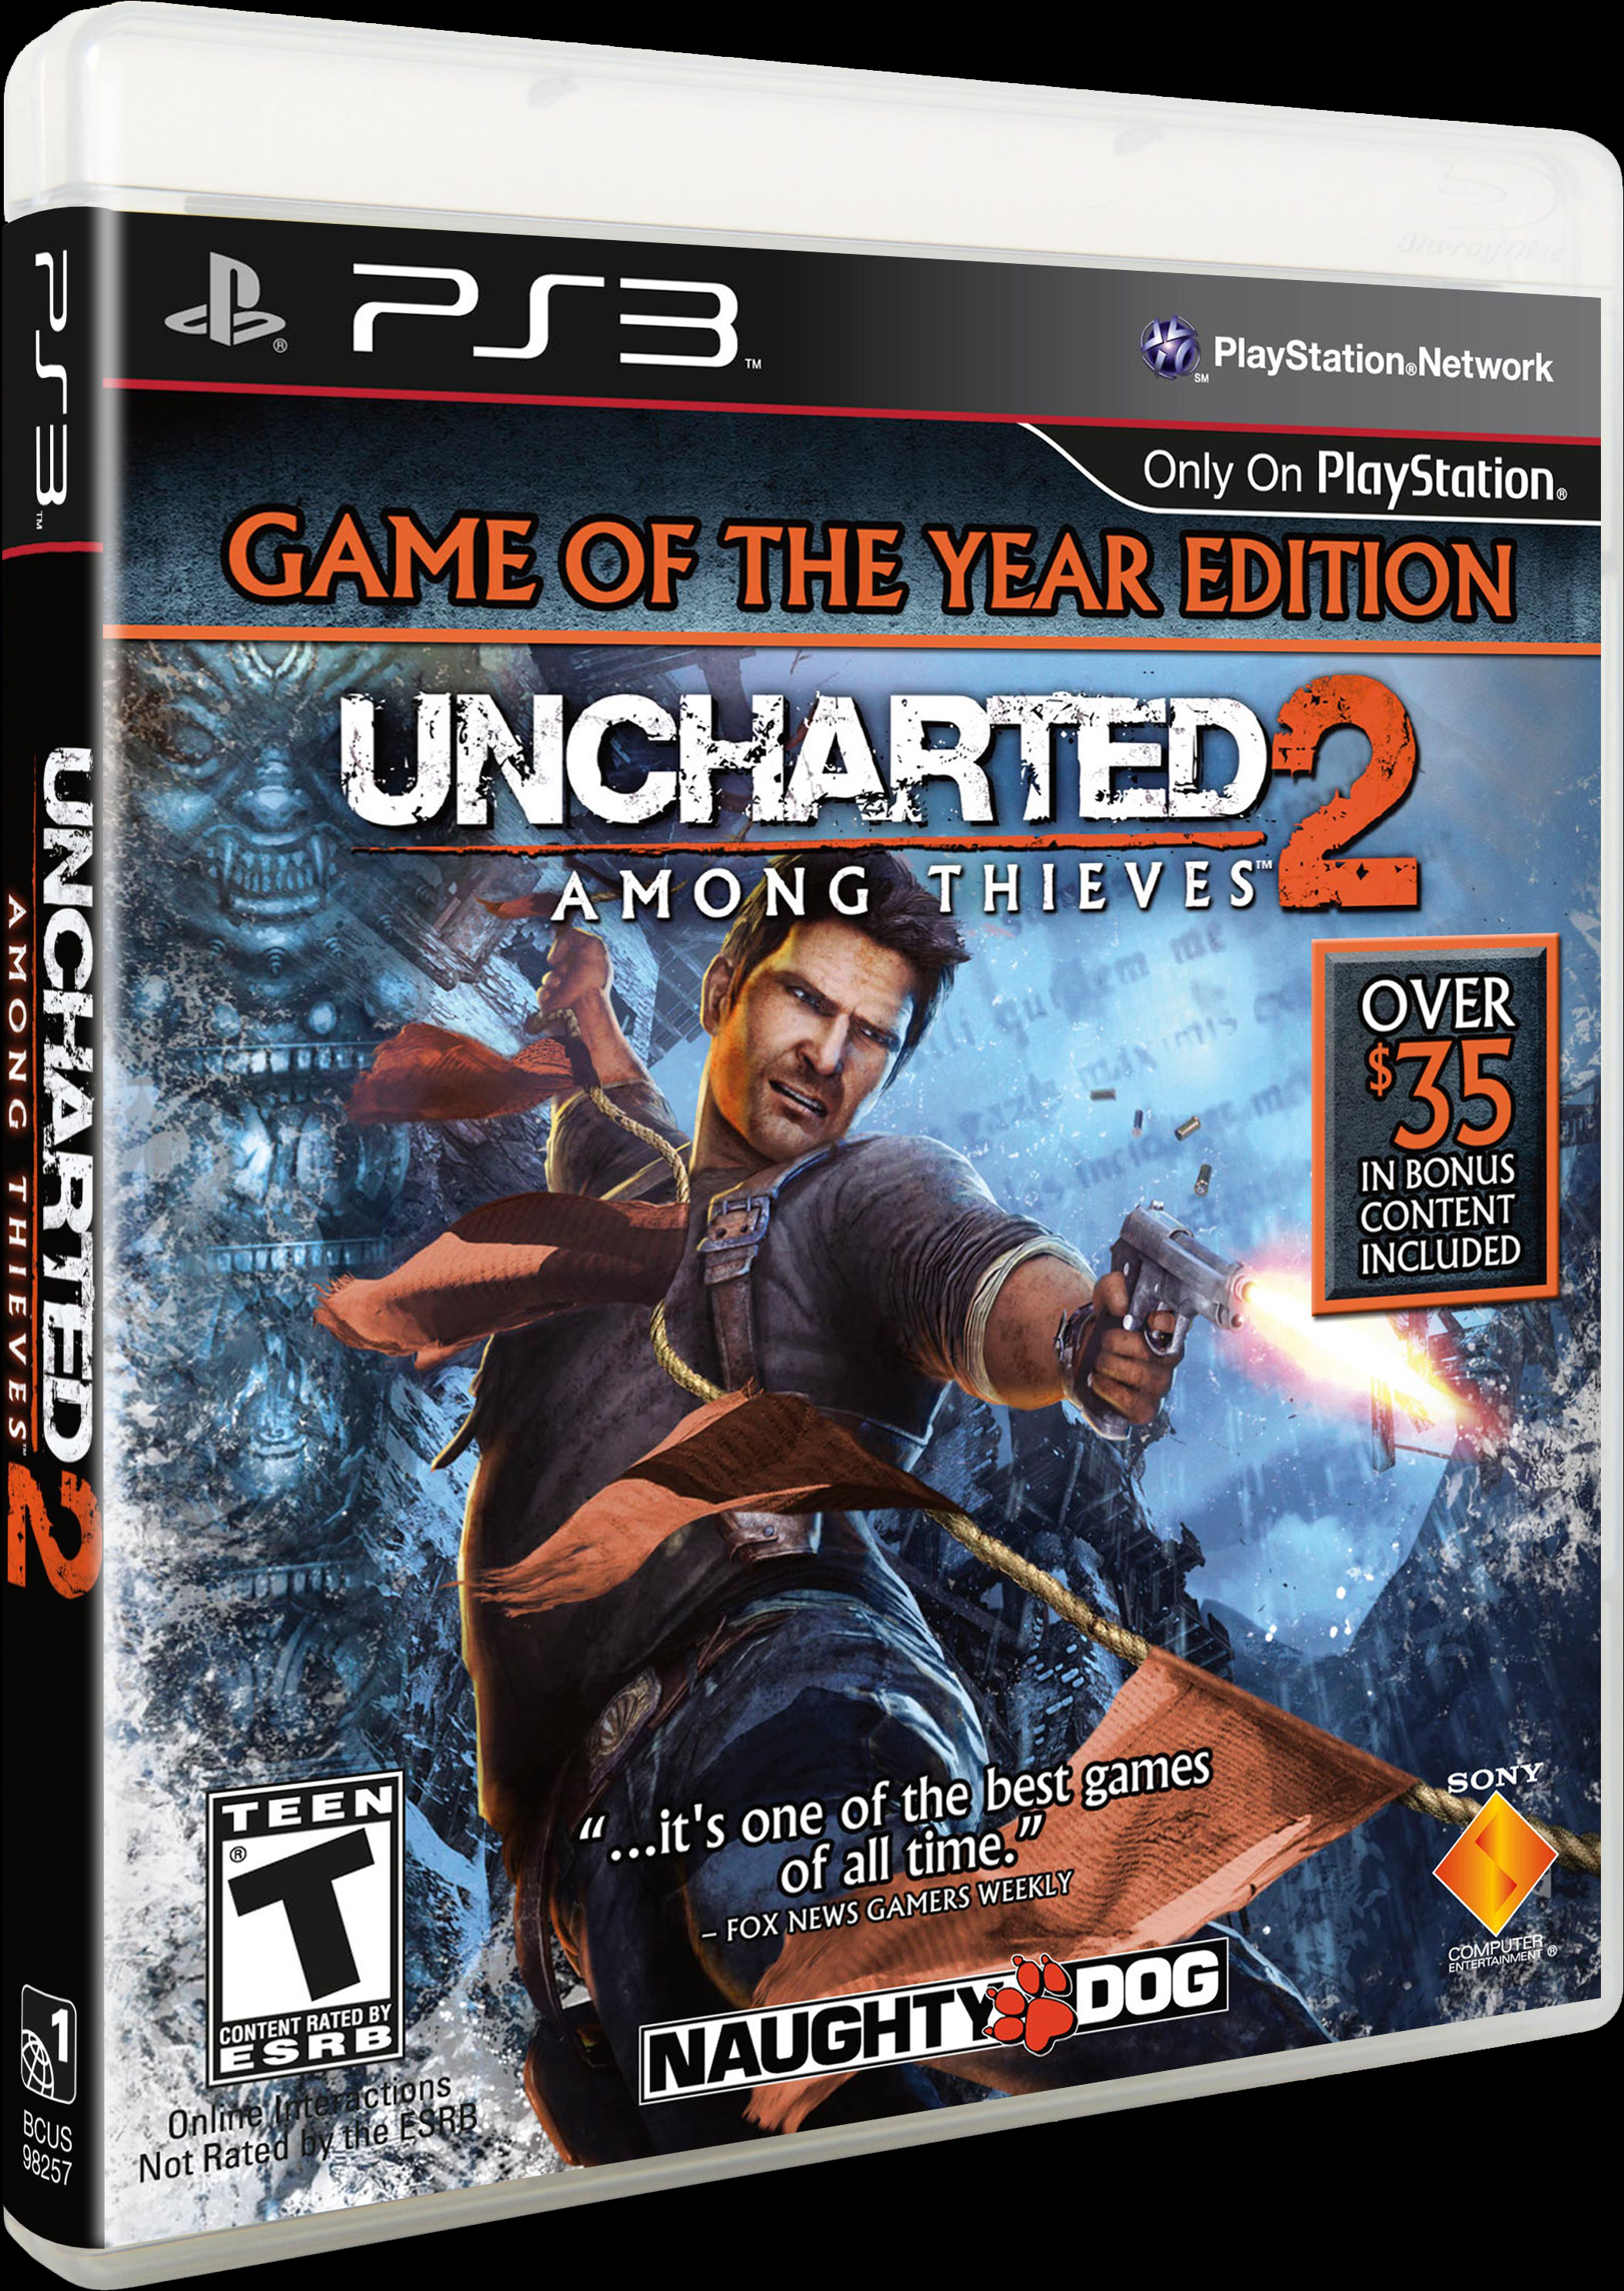 uncharted 3 game of the year edition